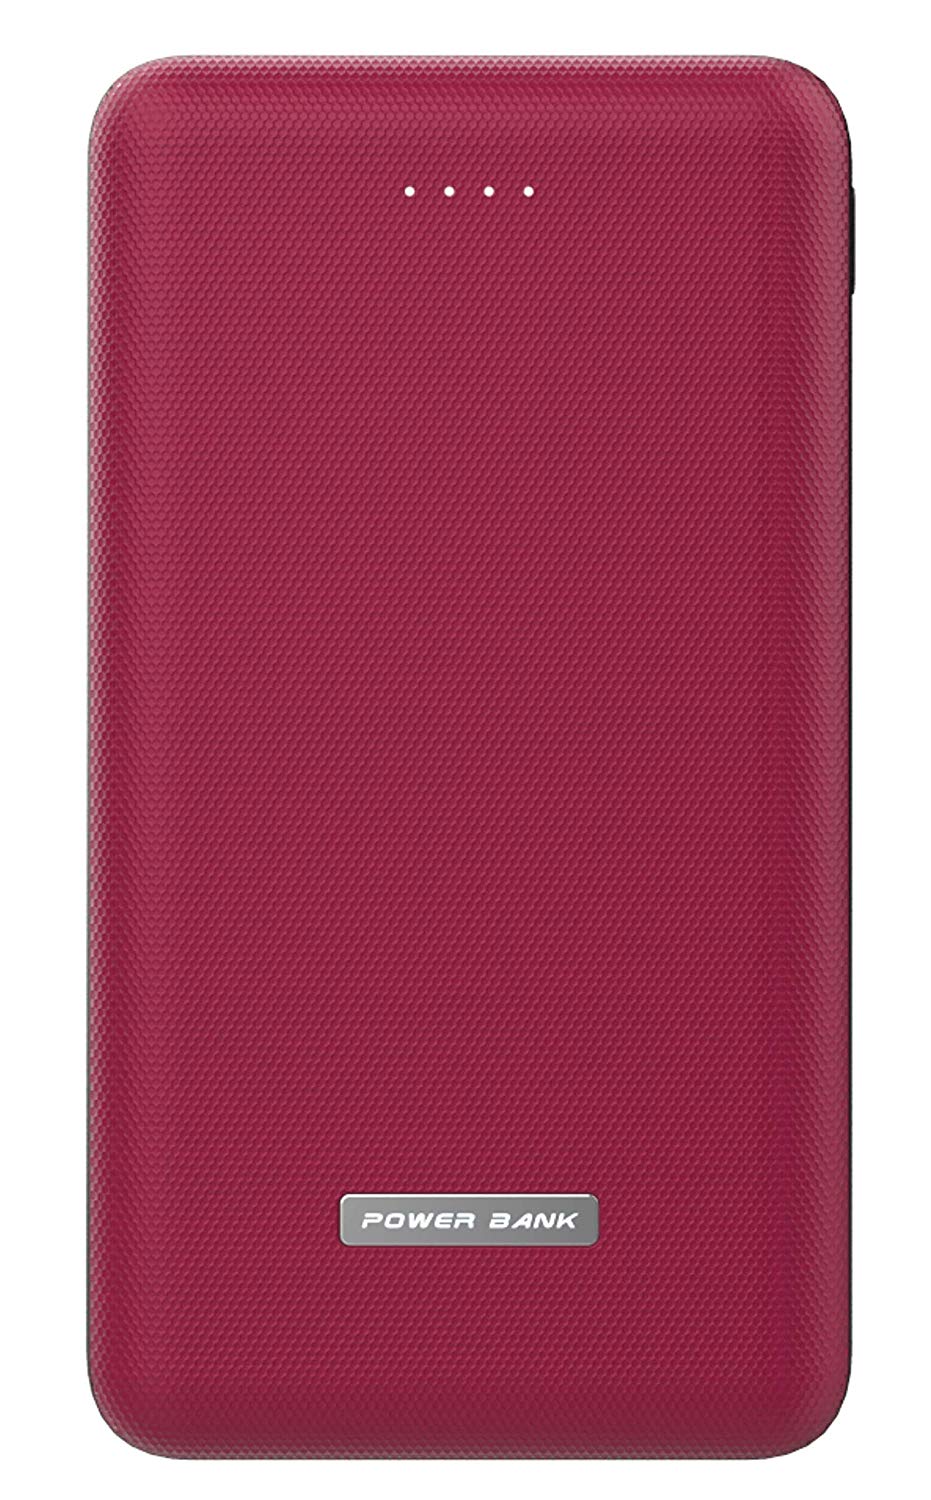 sprout power bank slim manual